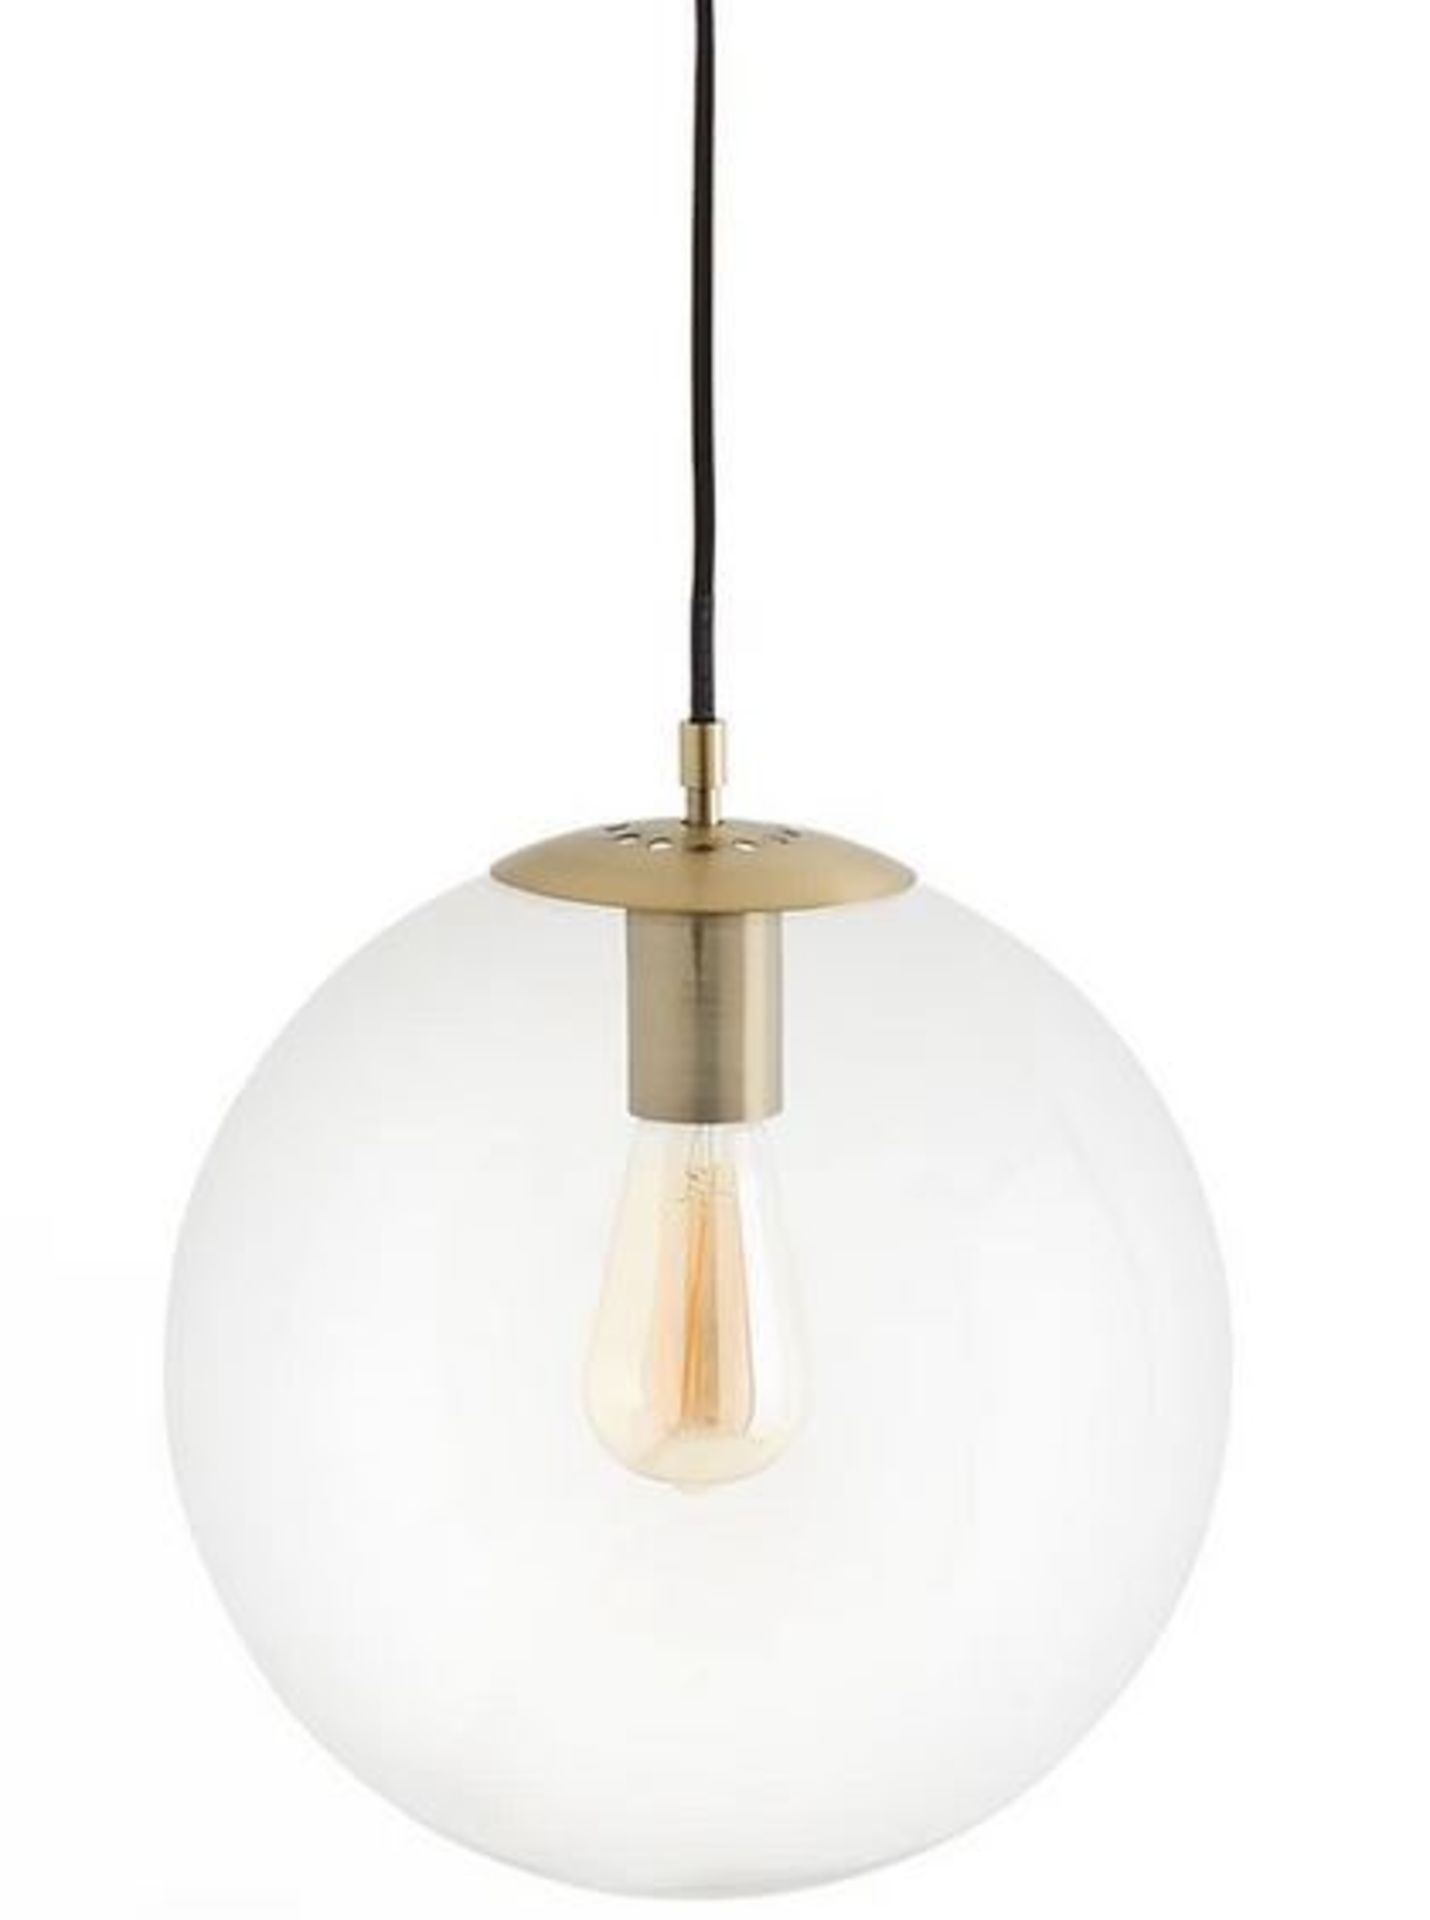 1 BOXED GRADE A DESIGNER BULEA GLASS AND BRASS BALL LIGHT - LIGHTBULB NOT INCLUDED / RRP £99.00 (